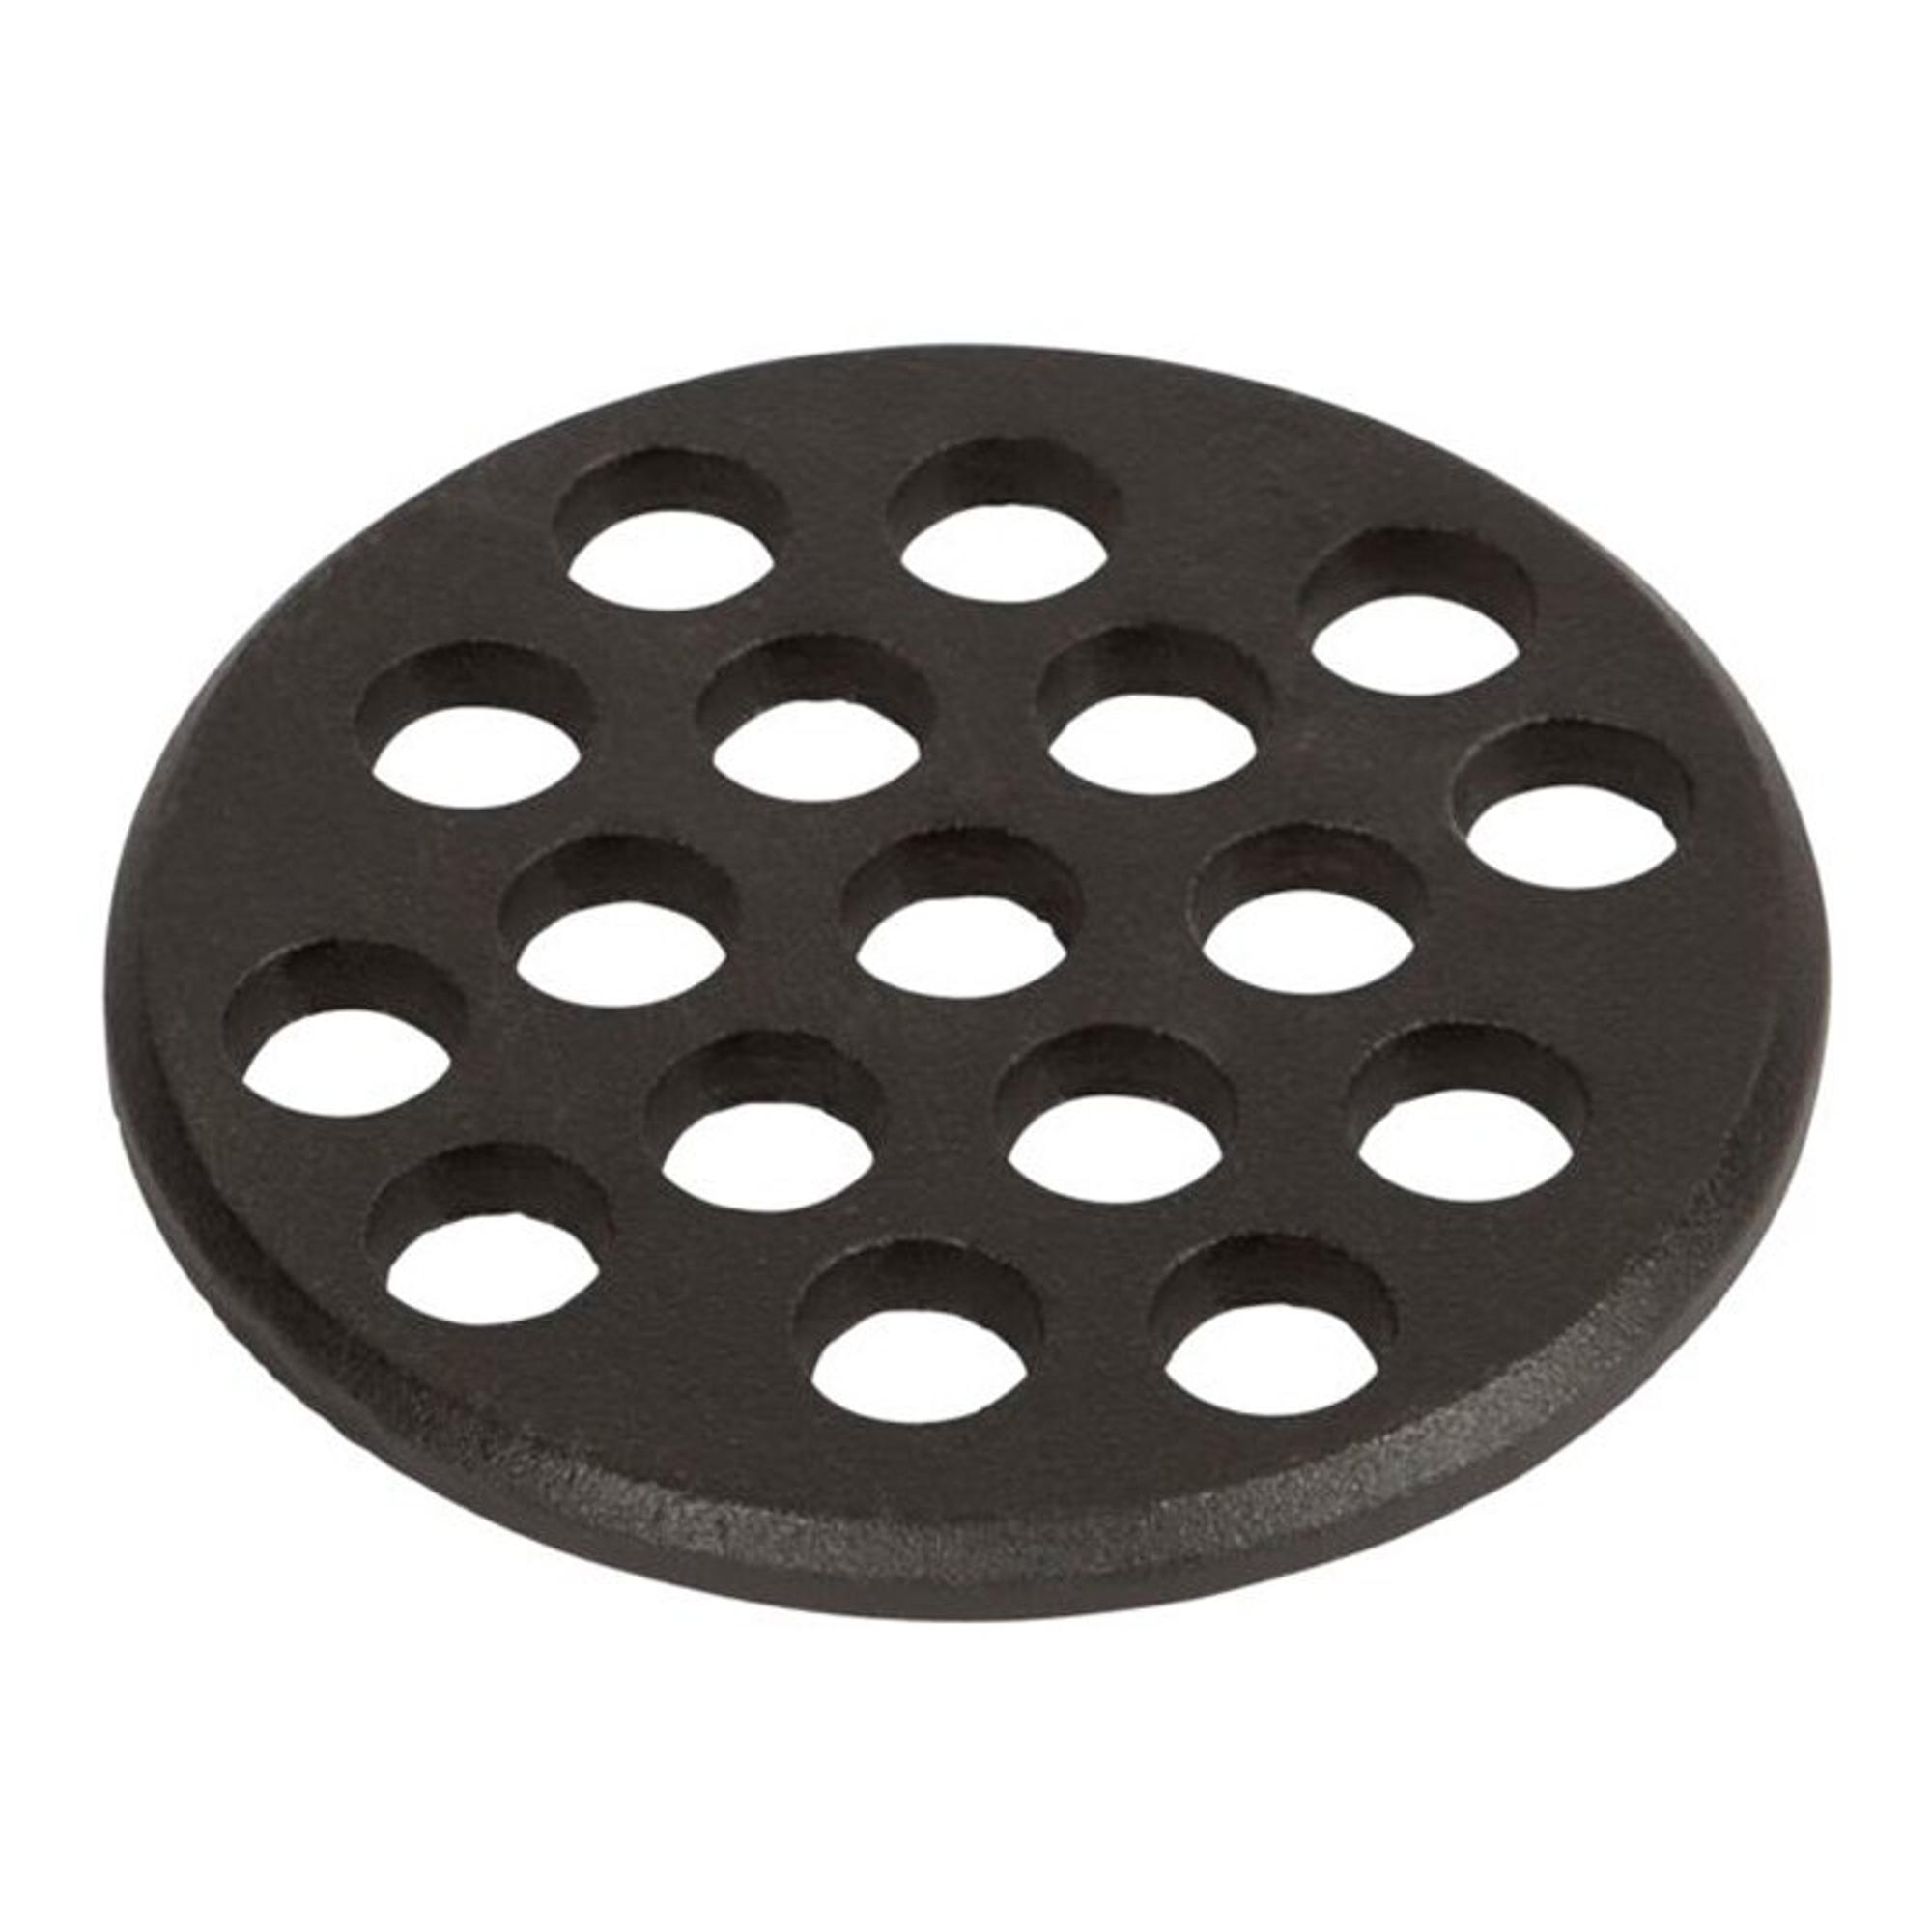 FIRE GRATE FOR LARGE EGG | 103055 | 665719103055